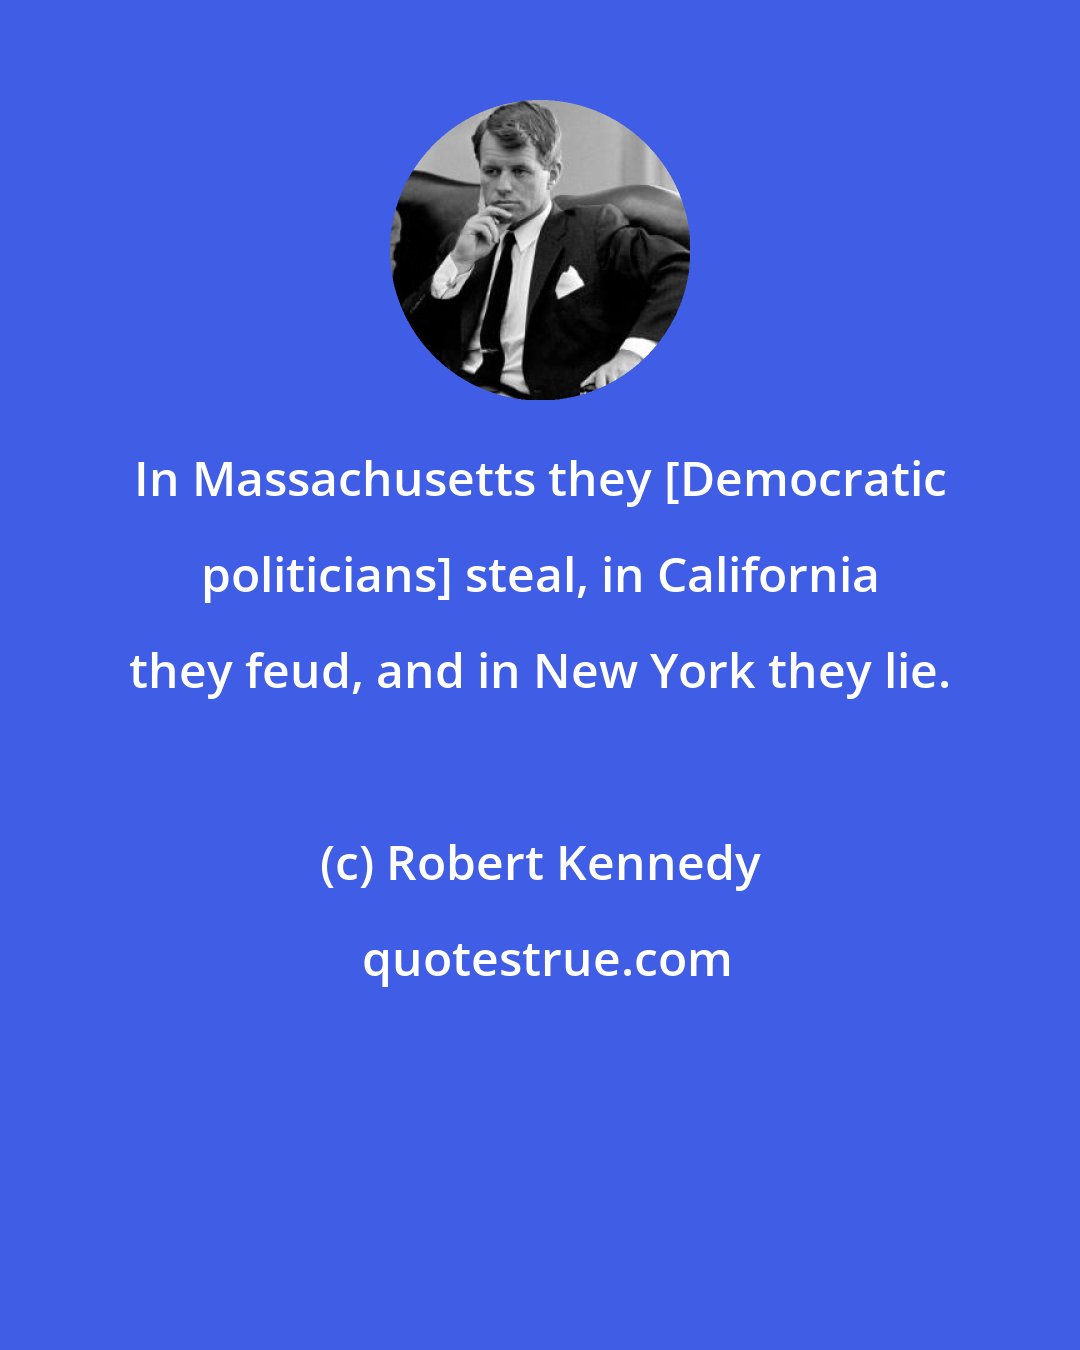 Robert Kennedy: In Massachusetts they [Democratic politicians] steal, in California they feud, and in New York they lie.